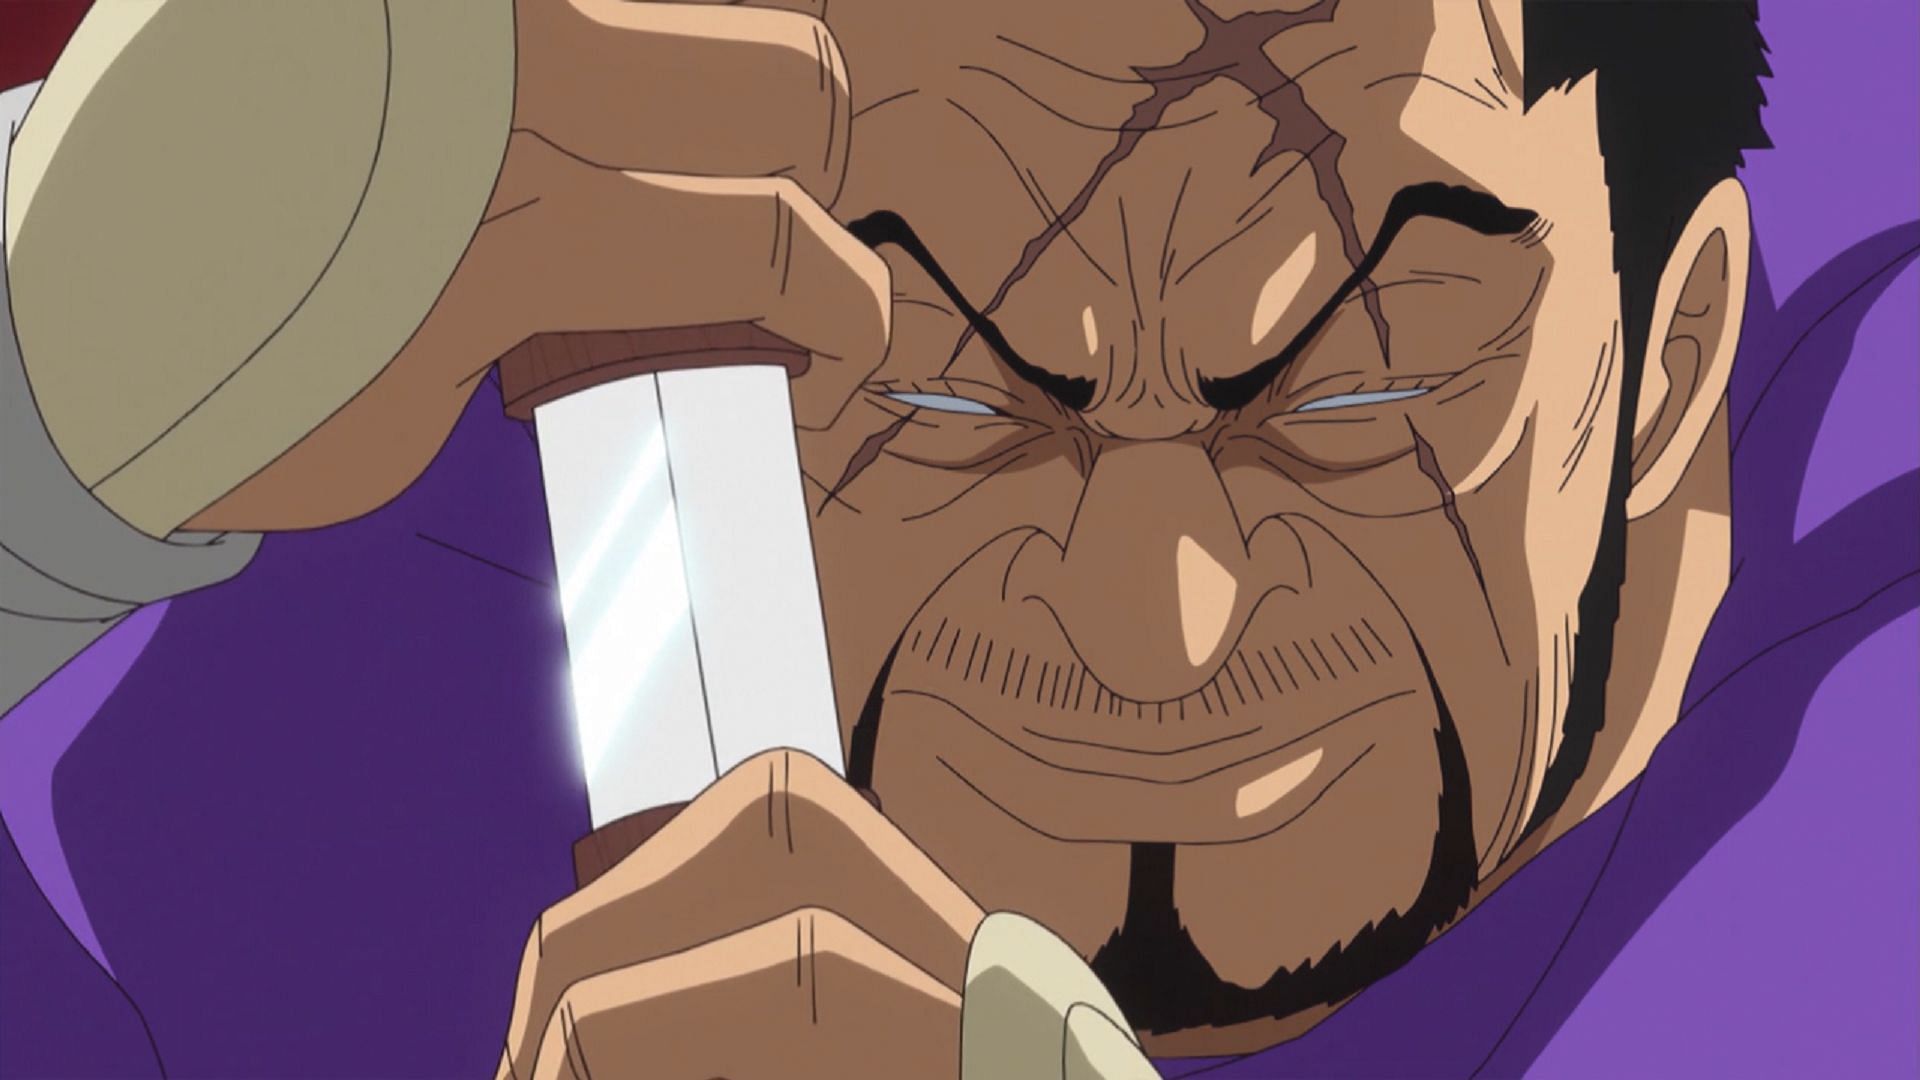 Fujitora as seen in One Piece (Image via Toei Animation, One Piece)